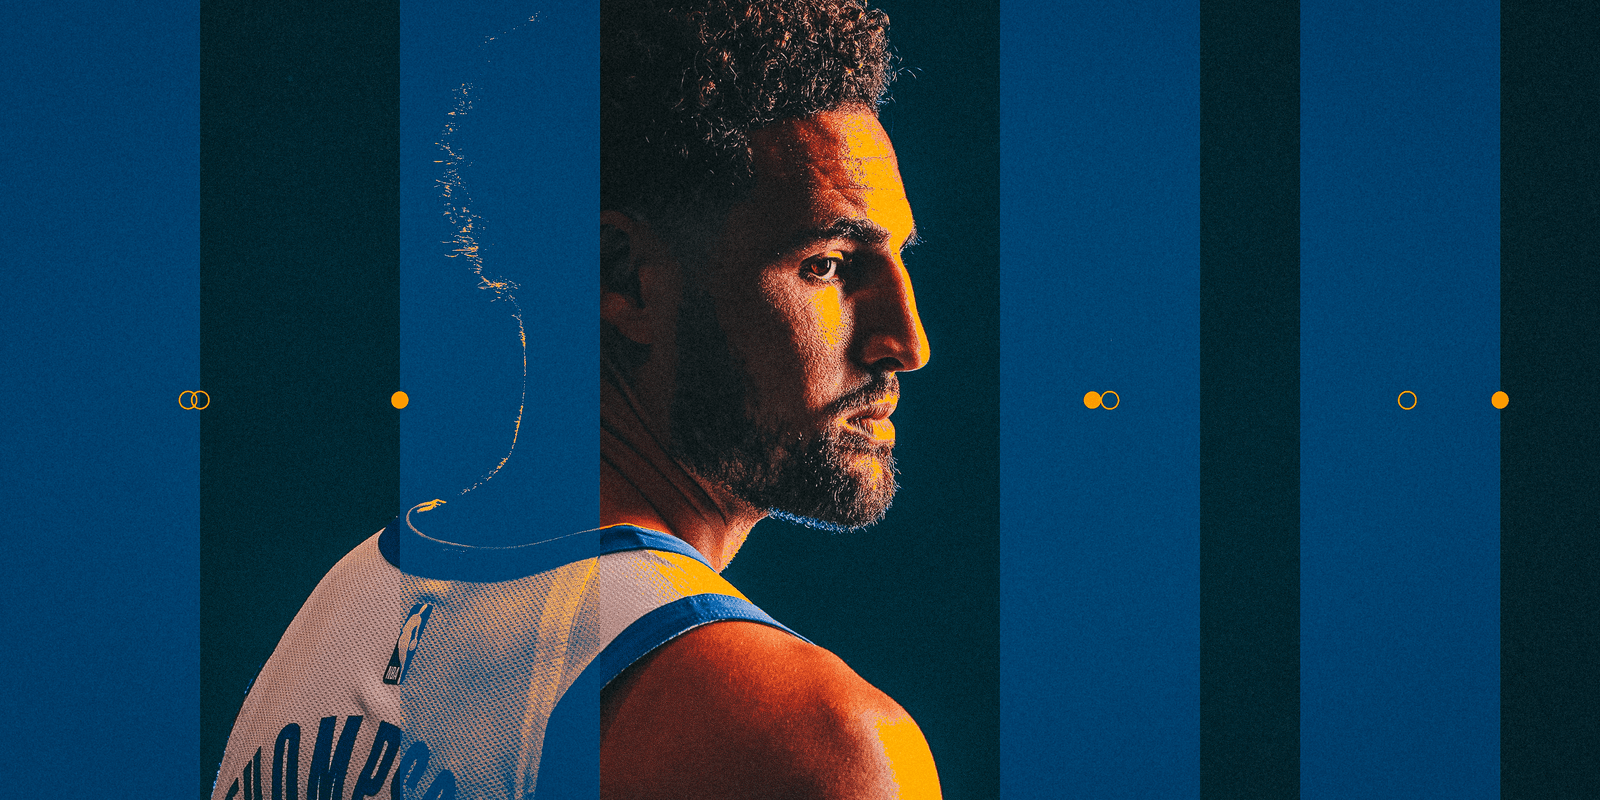 How Klay Thompson’s 13-year run with the Warriors splintered so unceremoniously